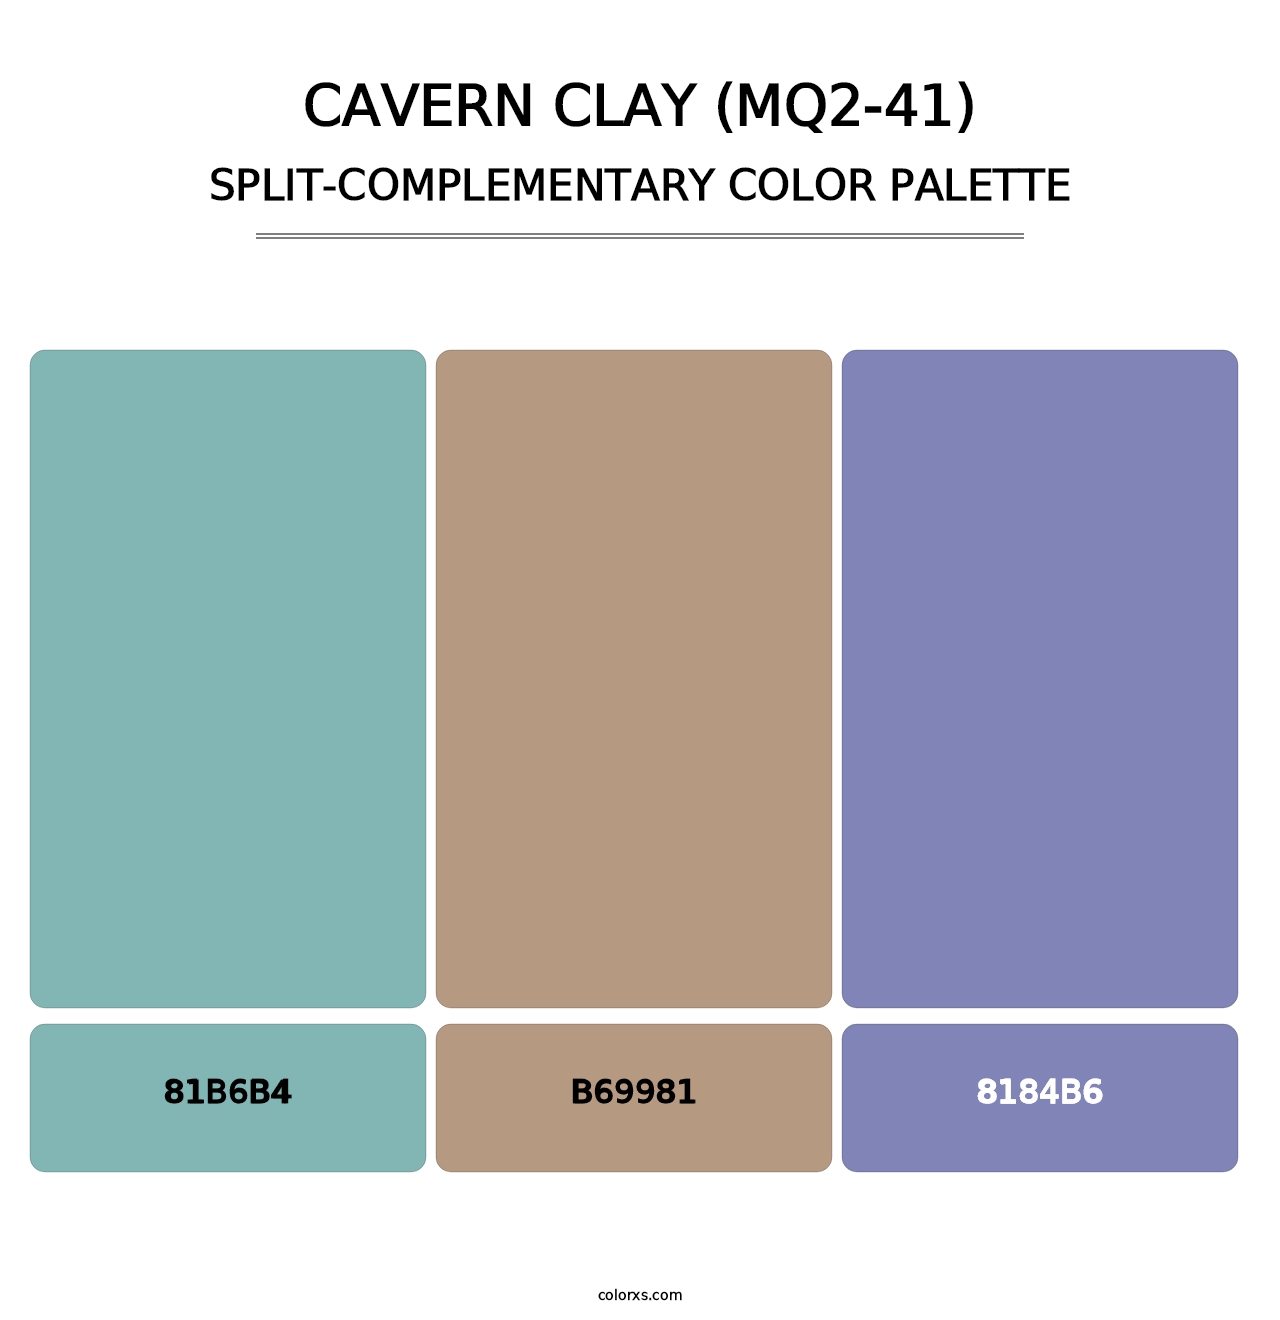 Cavern Clay (MQ2-41) - Split-Complementary Color Palette